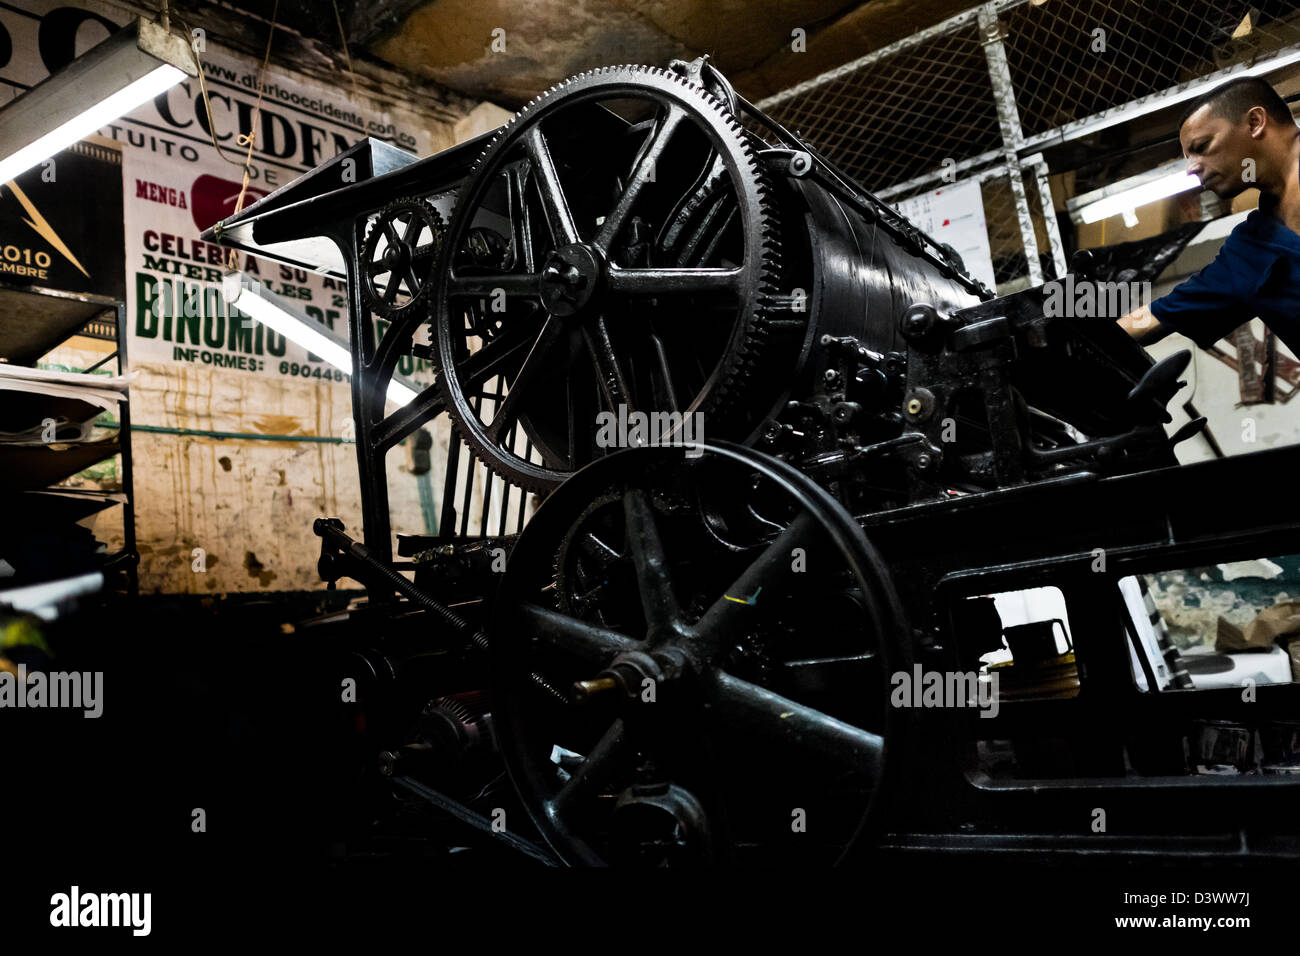 A Colombian master printer works on the ancient letterpress machine in the print shop in Cali, Colombia. Stock Photo